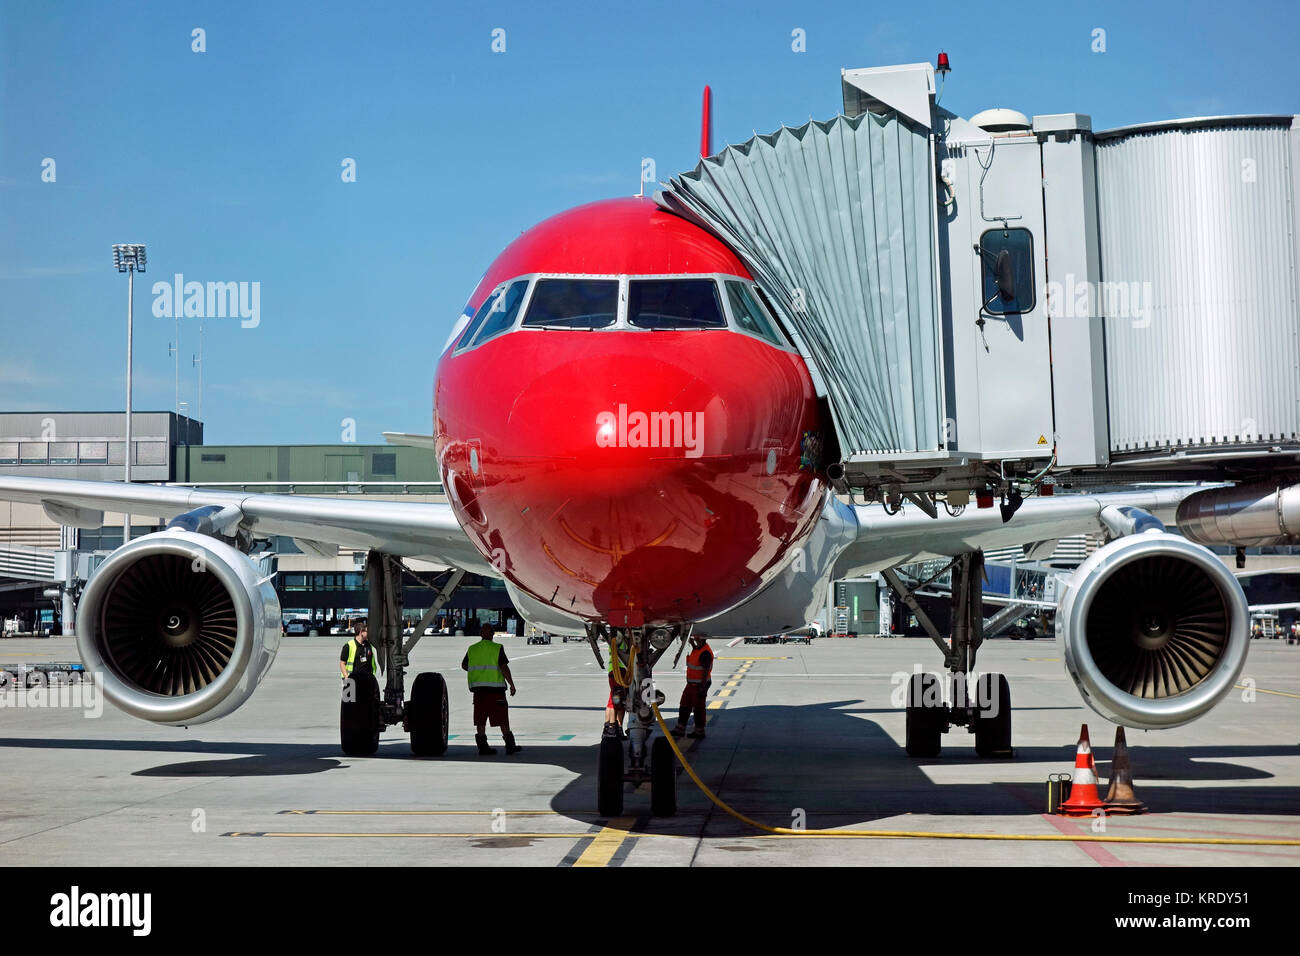 A jet aircraft being refuelled on the runway at a moderm airport with gangway or airbridge or tunnel attached. Taken at Zurich airport in Switzerland. Stock Photo